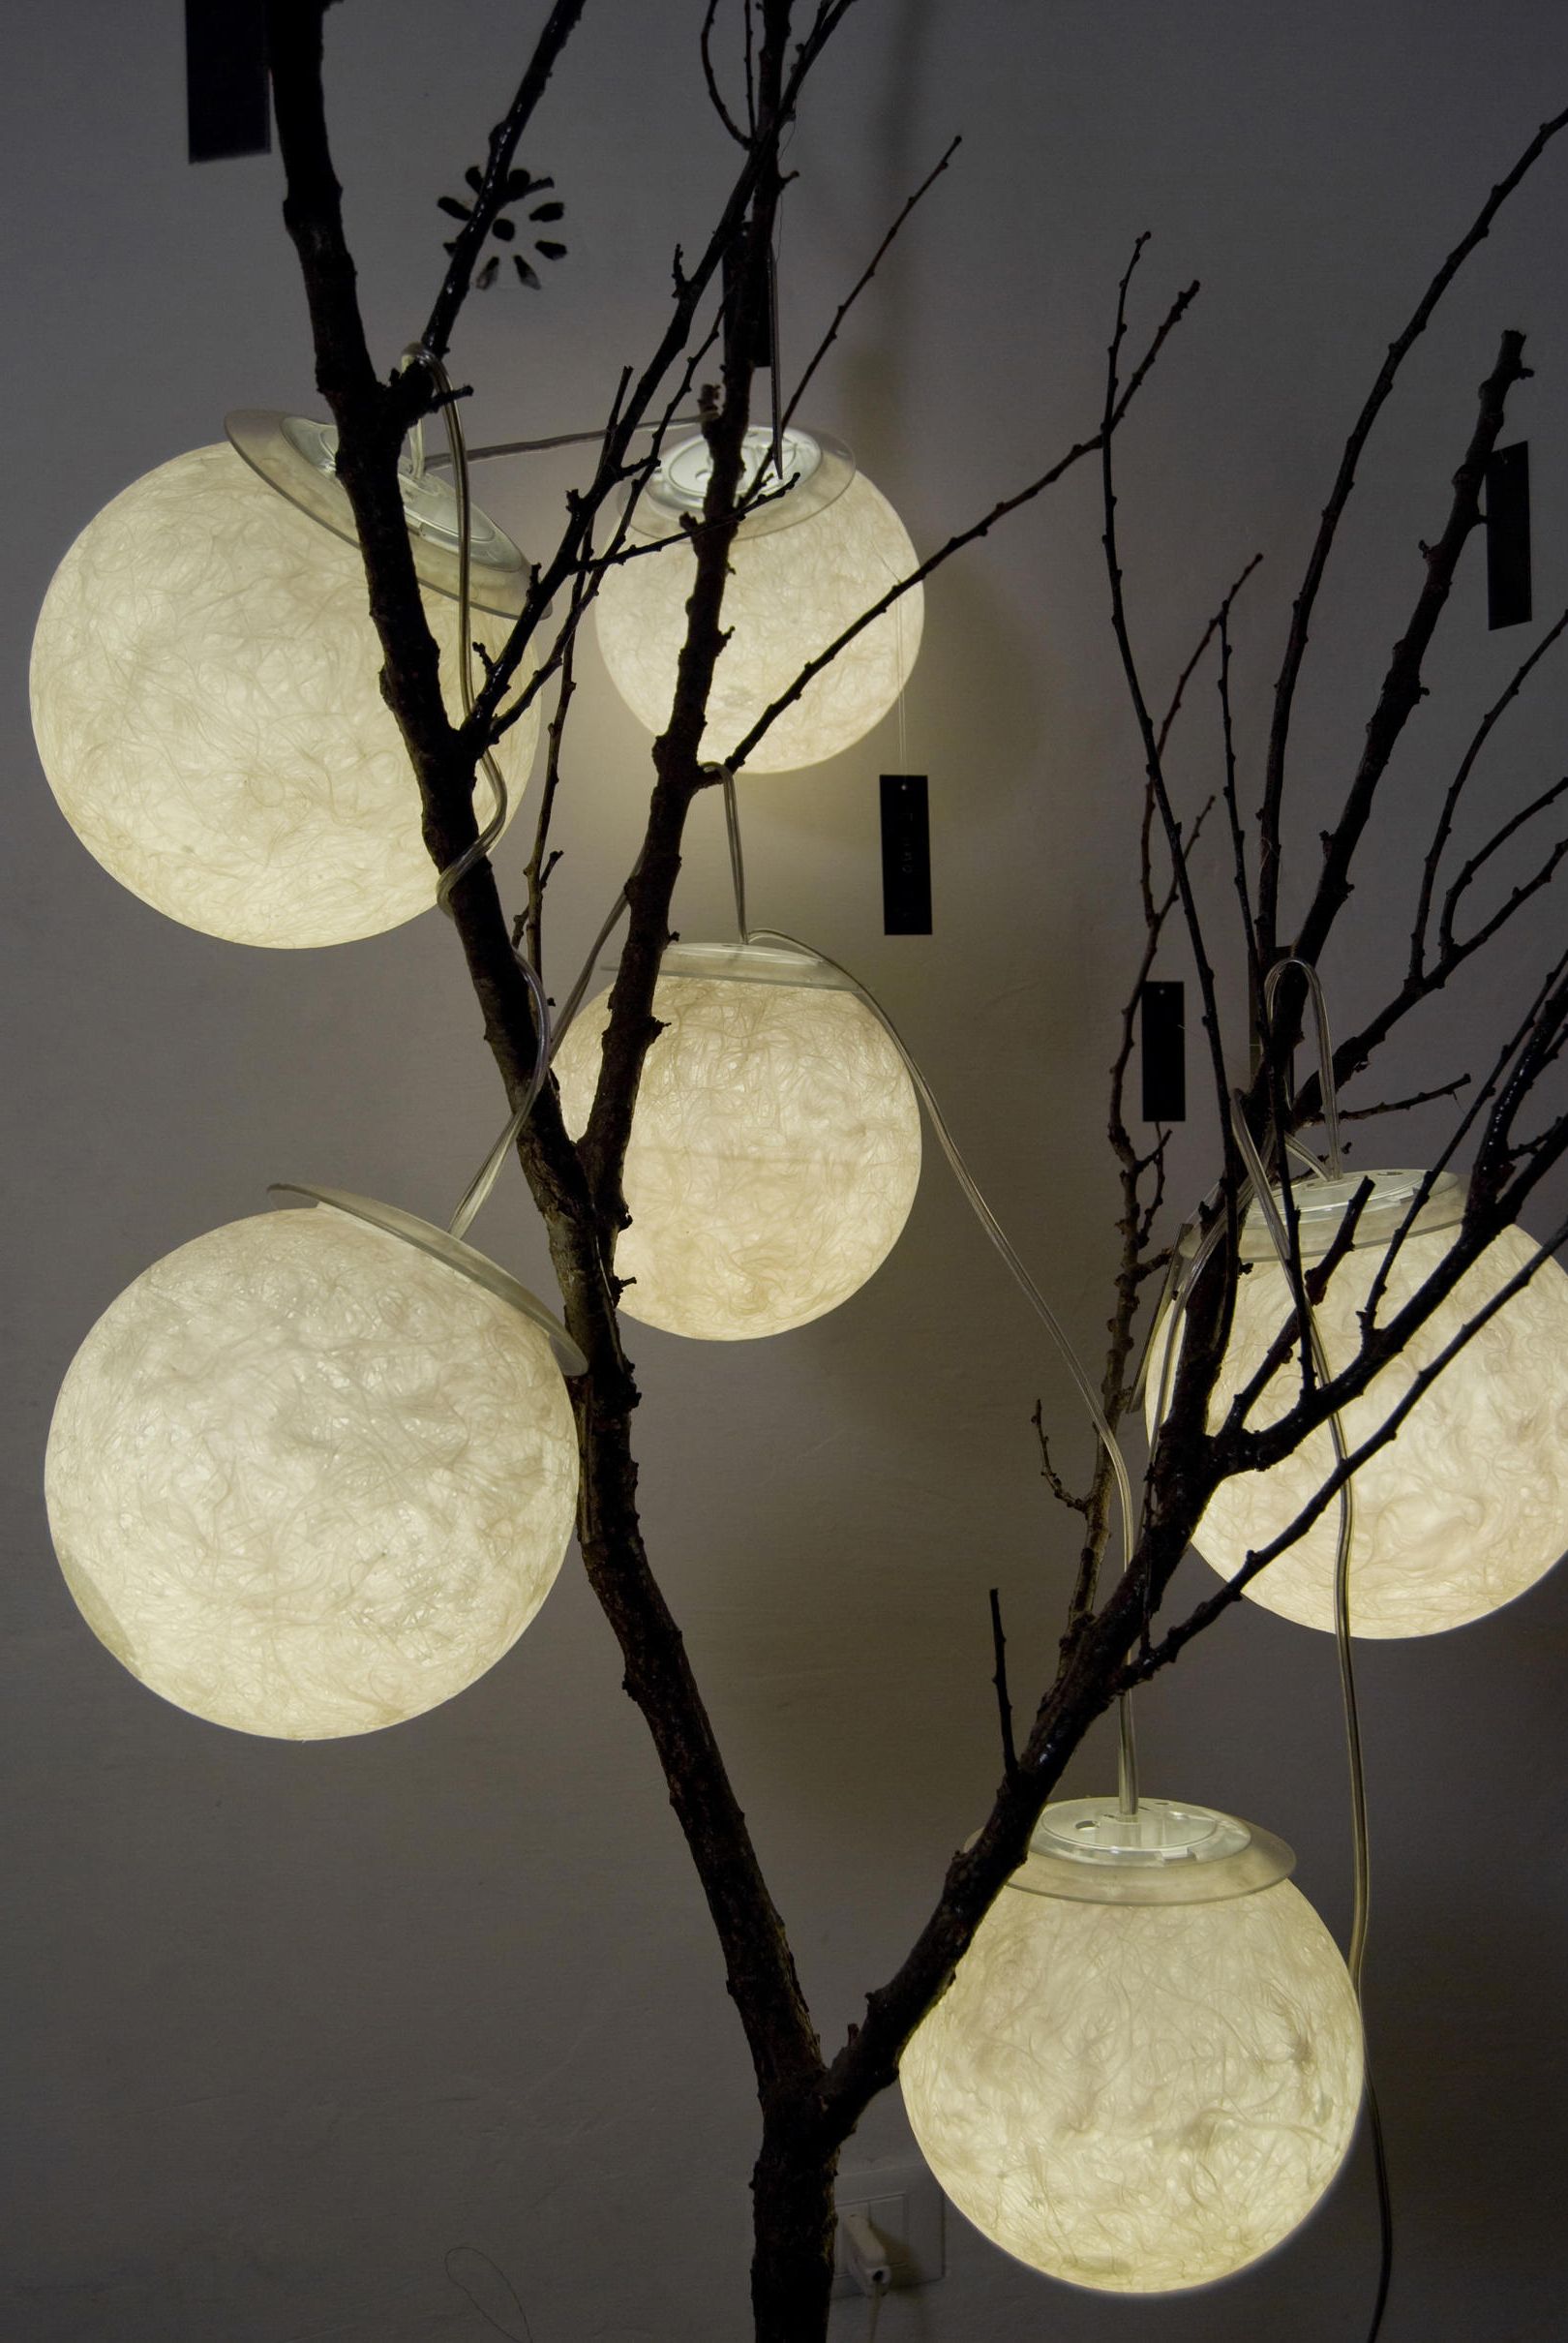 Tree Of Life Floor Lamp | Architonic With Tree Floor Lamps (View 1 of 20)